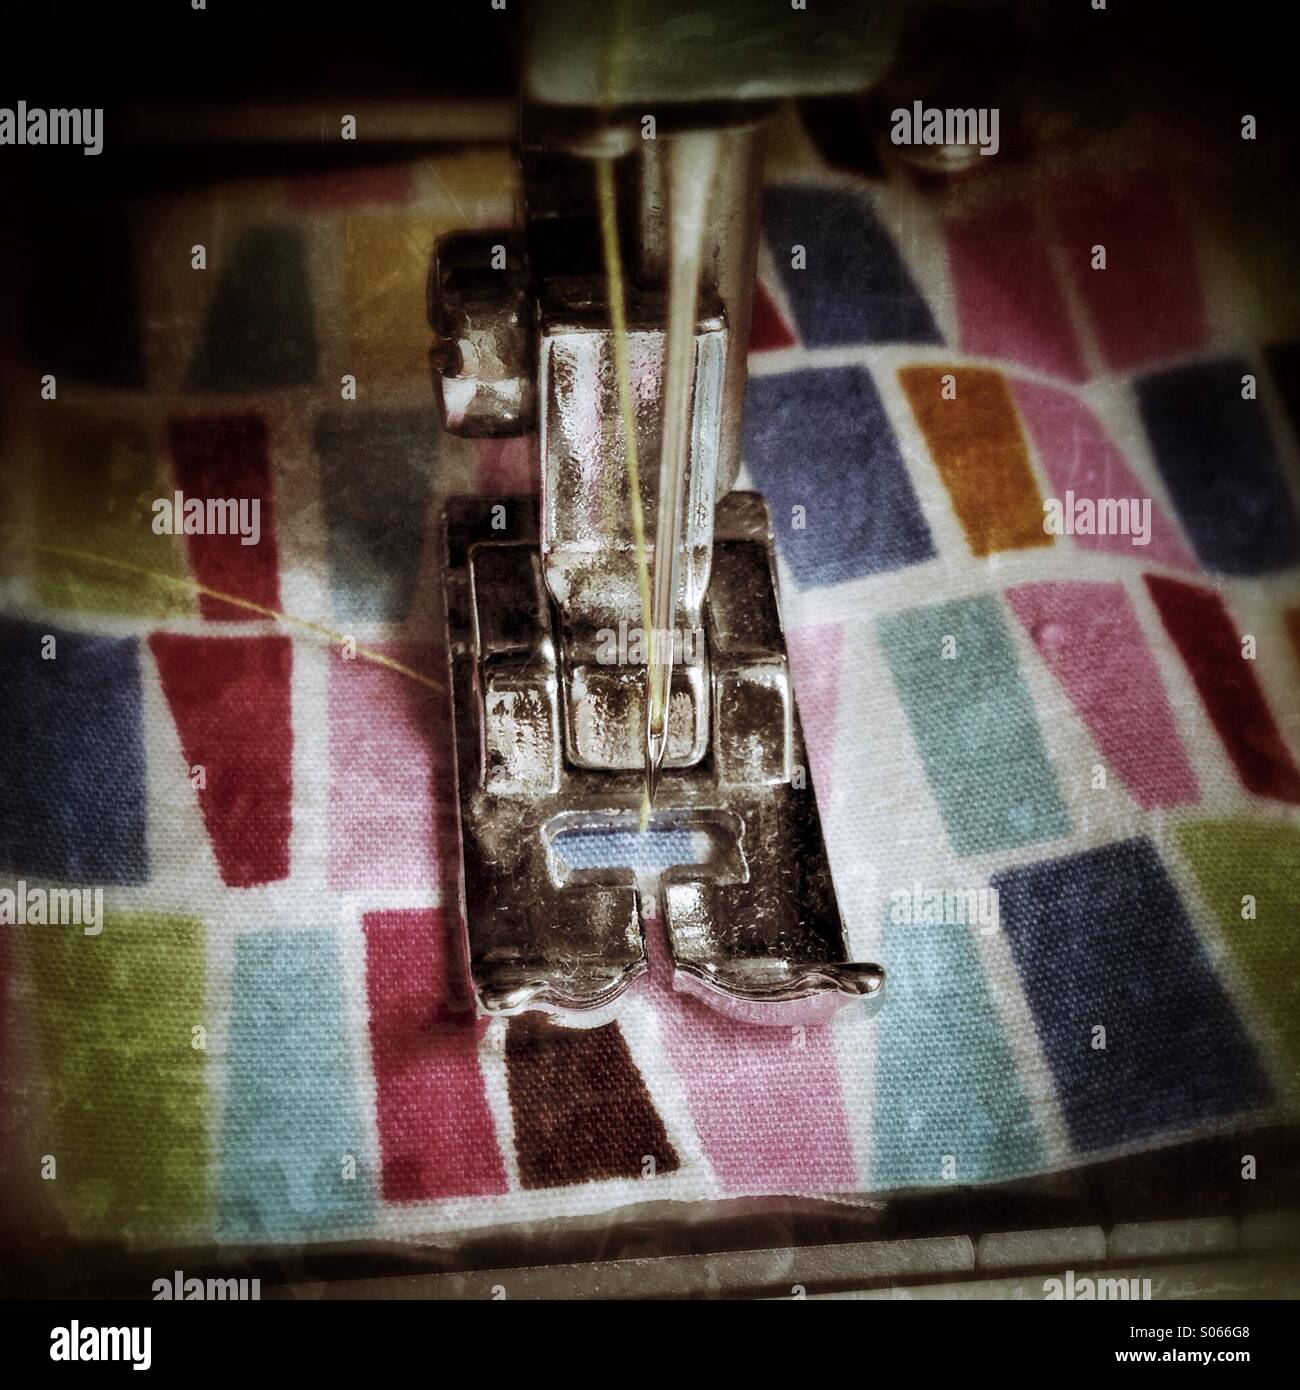 Sewing machine sewing multi coloured fabric, with grunge effect Stock Photo